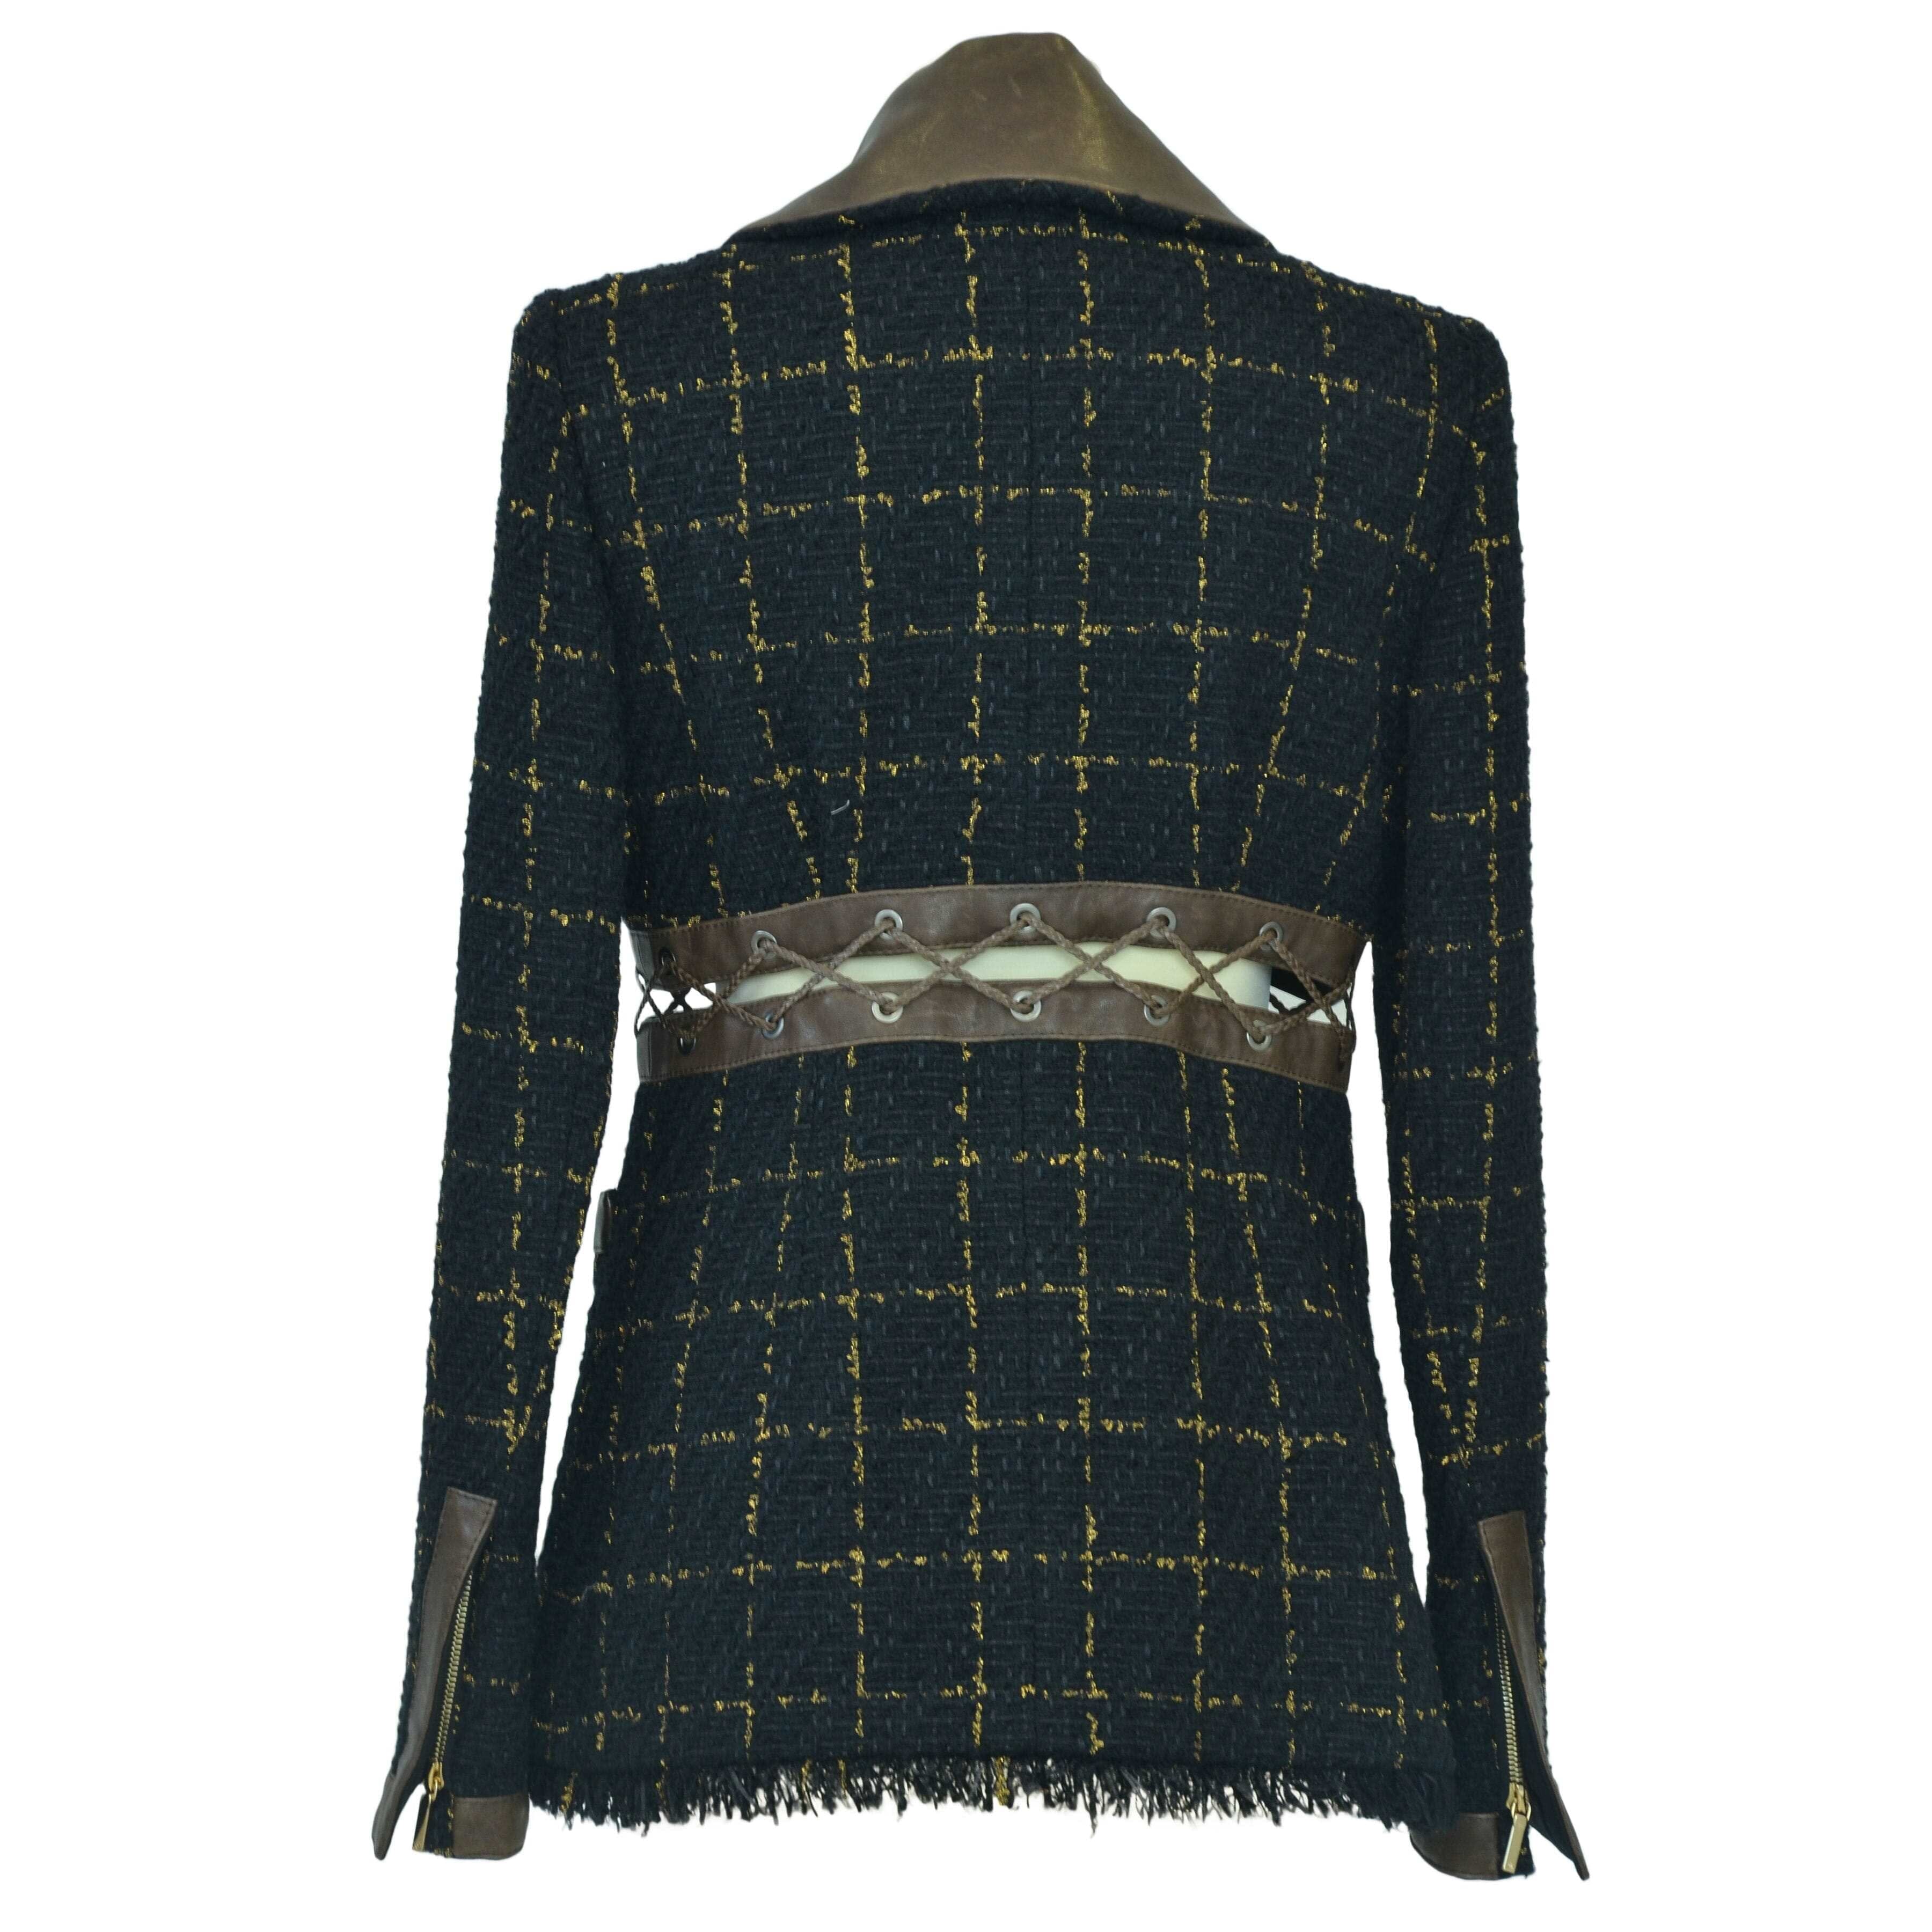 Black/Gold Fantasy Tweed Jacket with Leather Trims Clothing Chanel